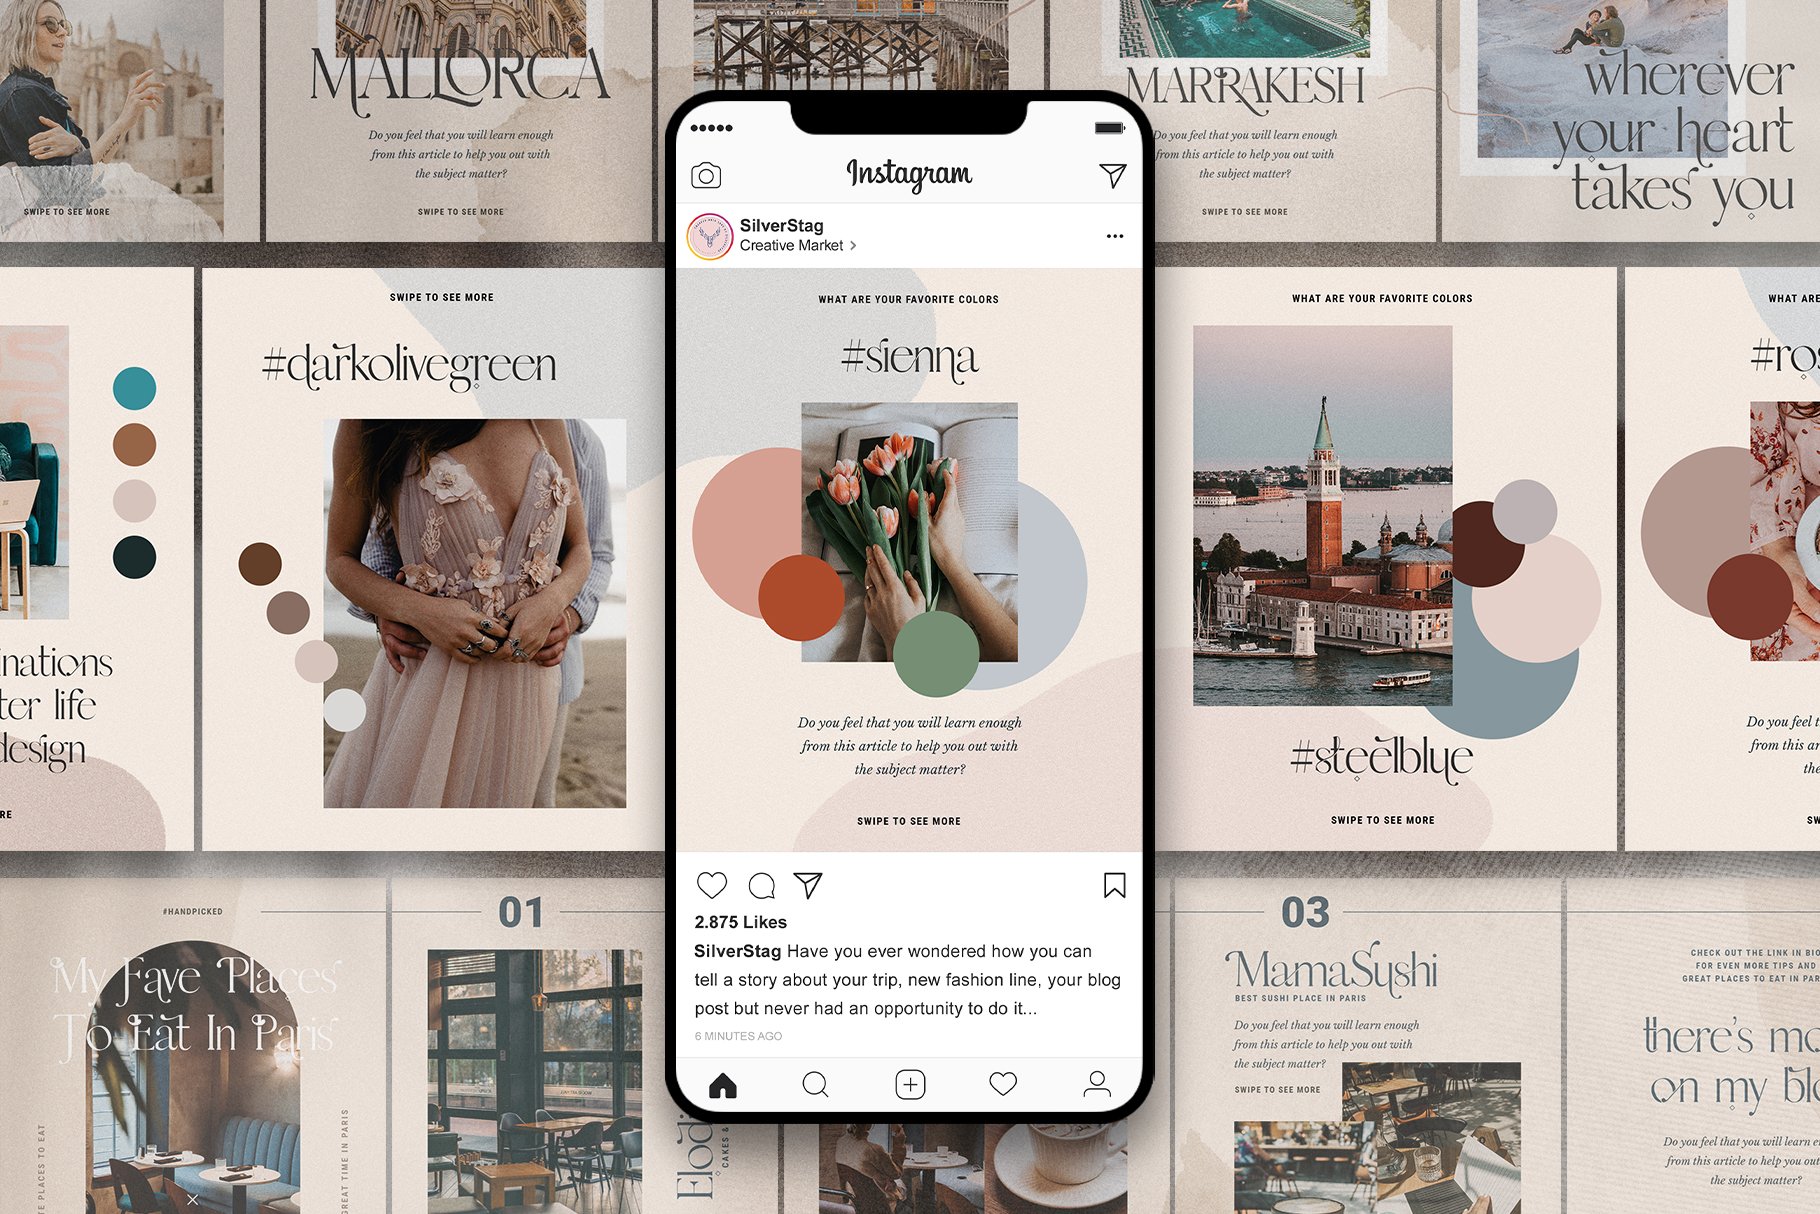 #InstaFlow Carousel Posts & Stories cover image.